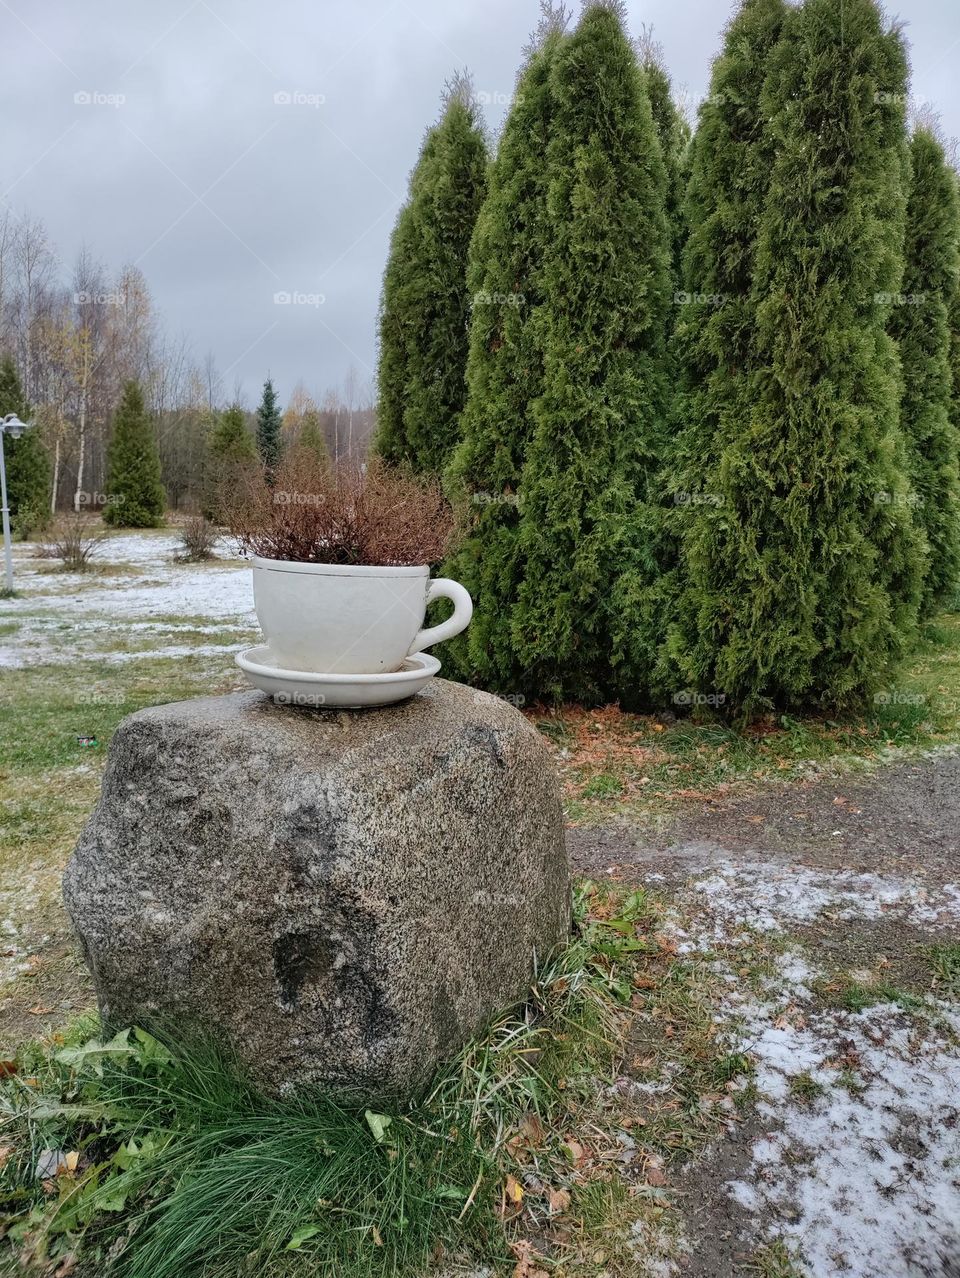 a cup on the stone